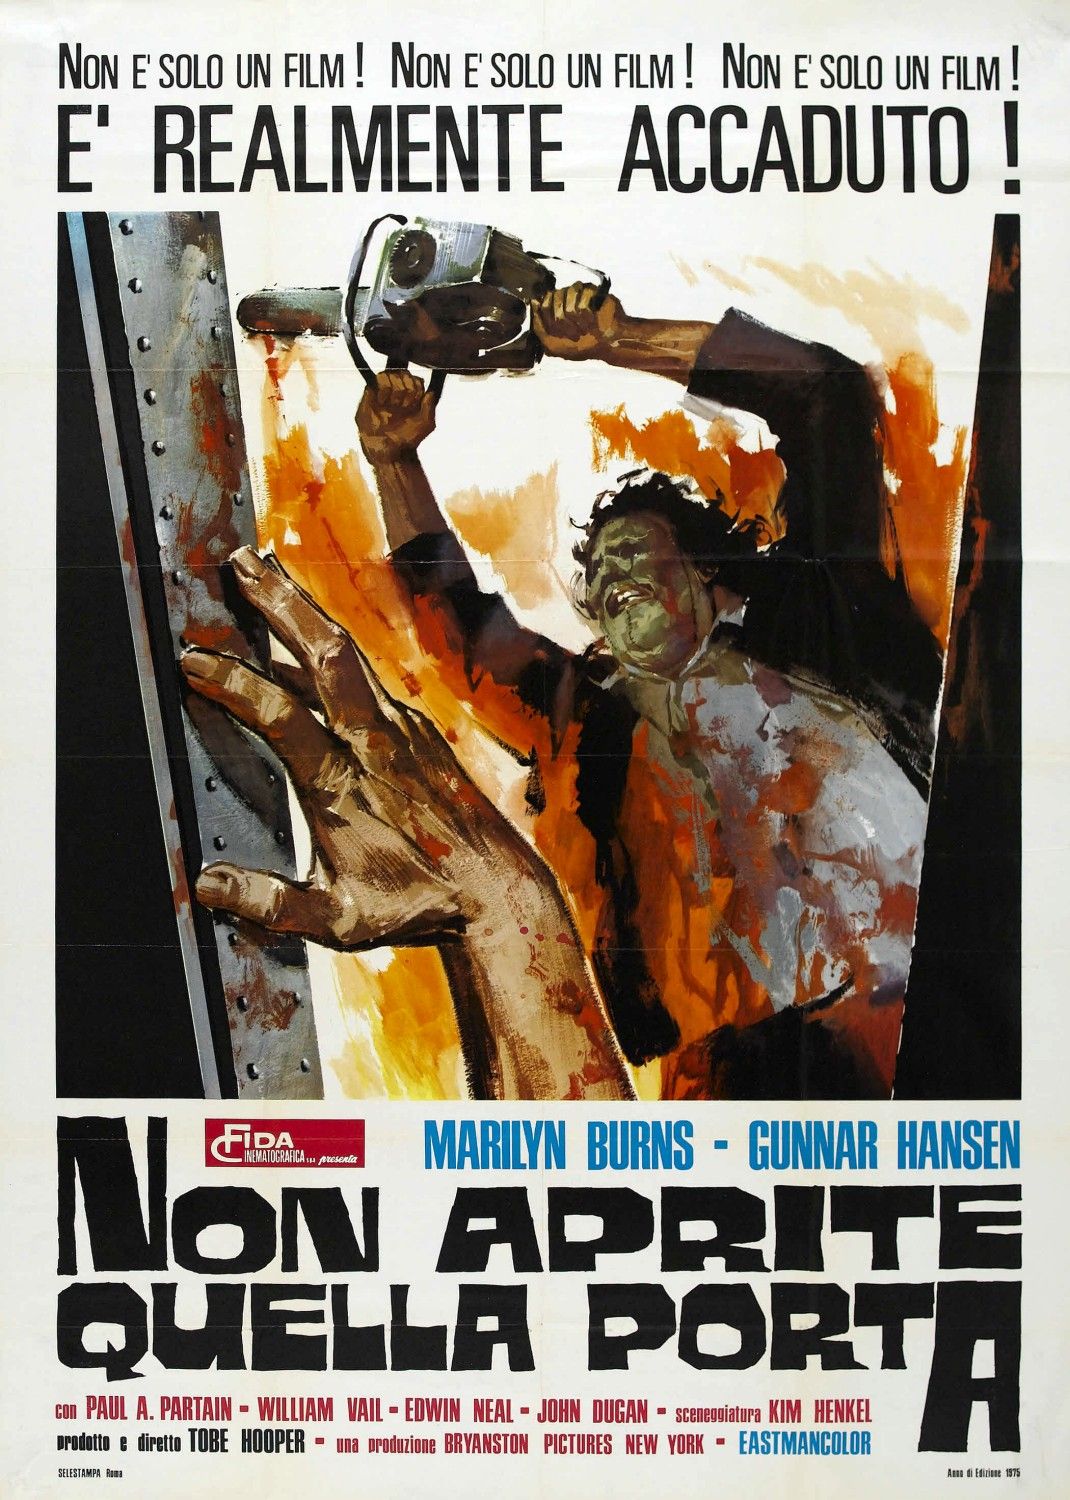 Extra Large Movie Poster Image for The Texas Chainsaw Massacre (#2 of 4)